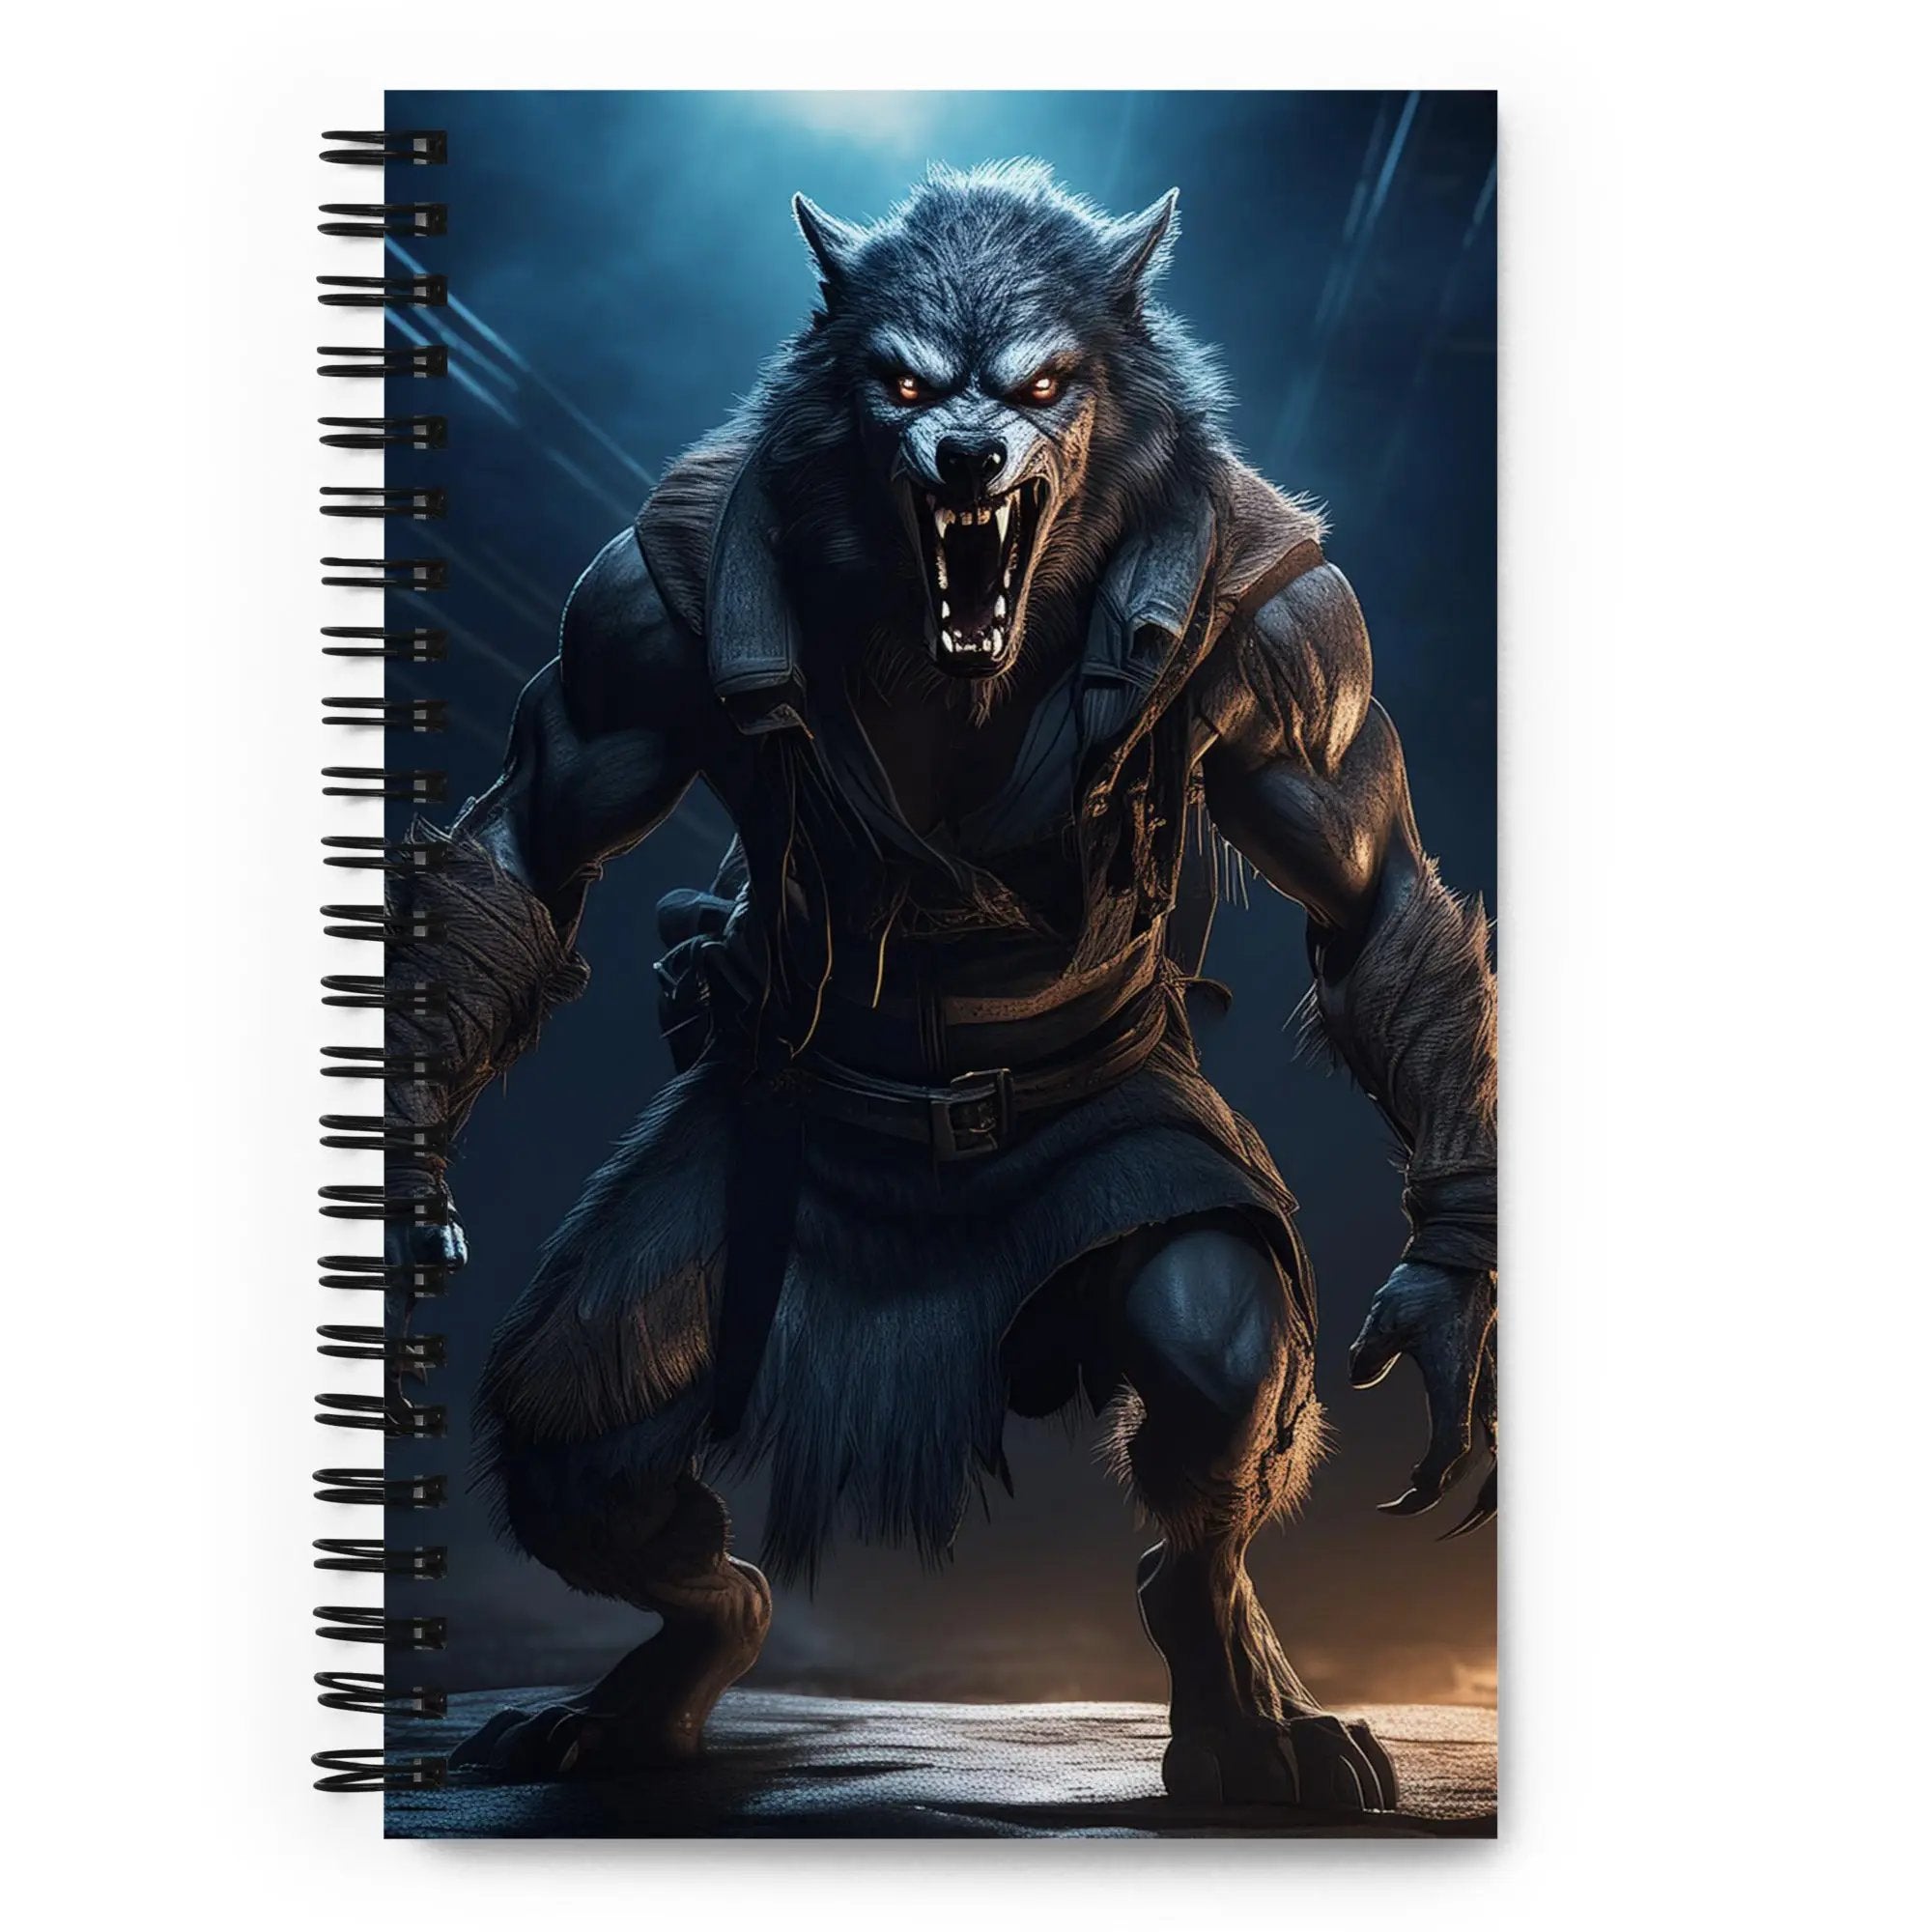 The Monster Squad "Wolfman" Spiral notebook